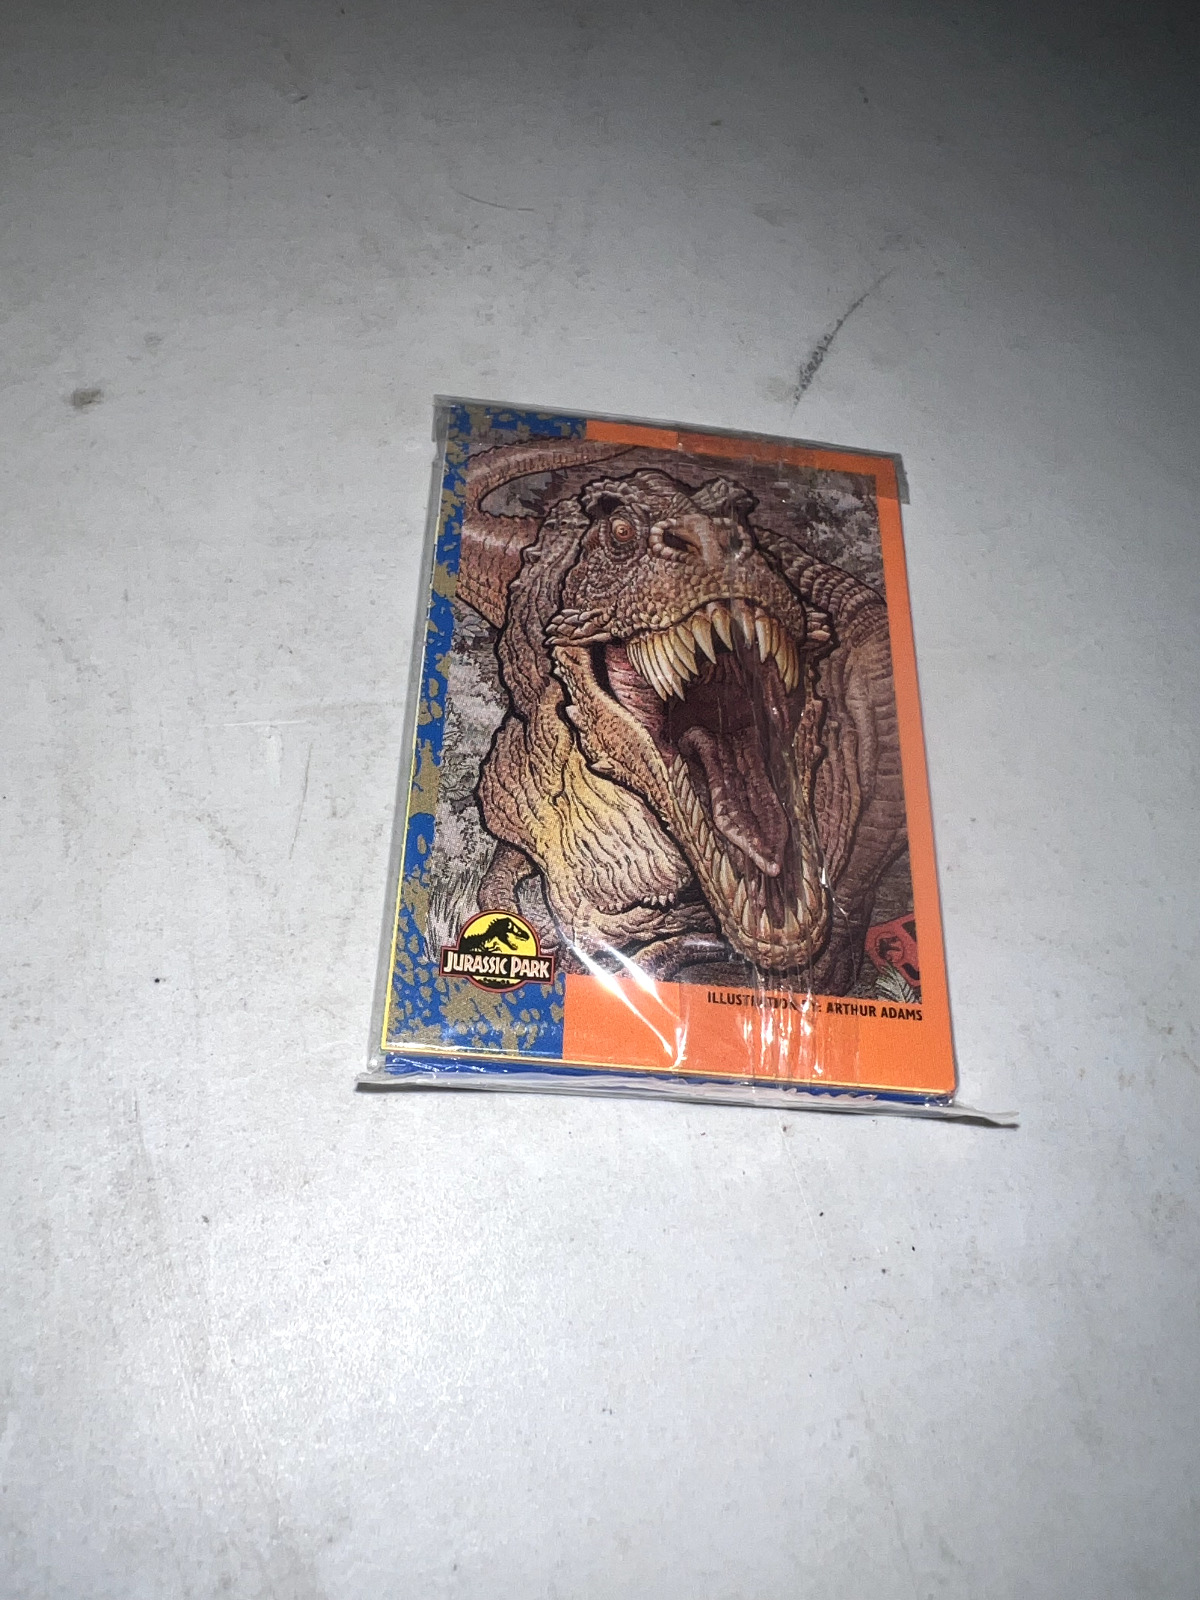 NEW SEALED Jurassic Park Promo Card Biggest Event Topps  USA 1992 PROMO 5 PACK